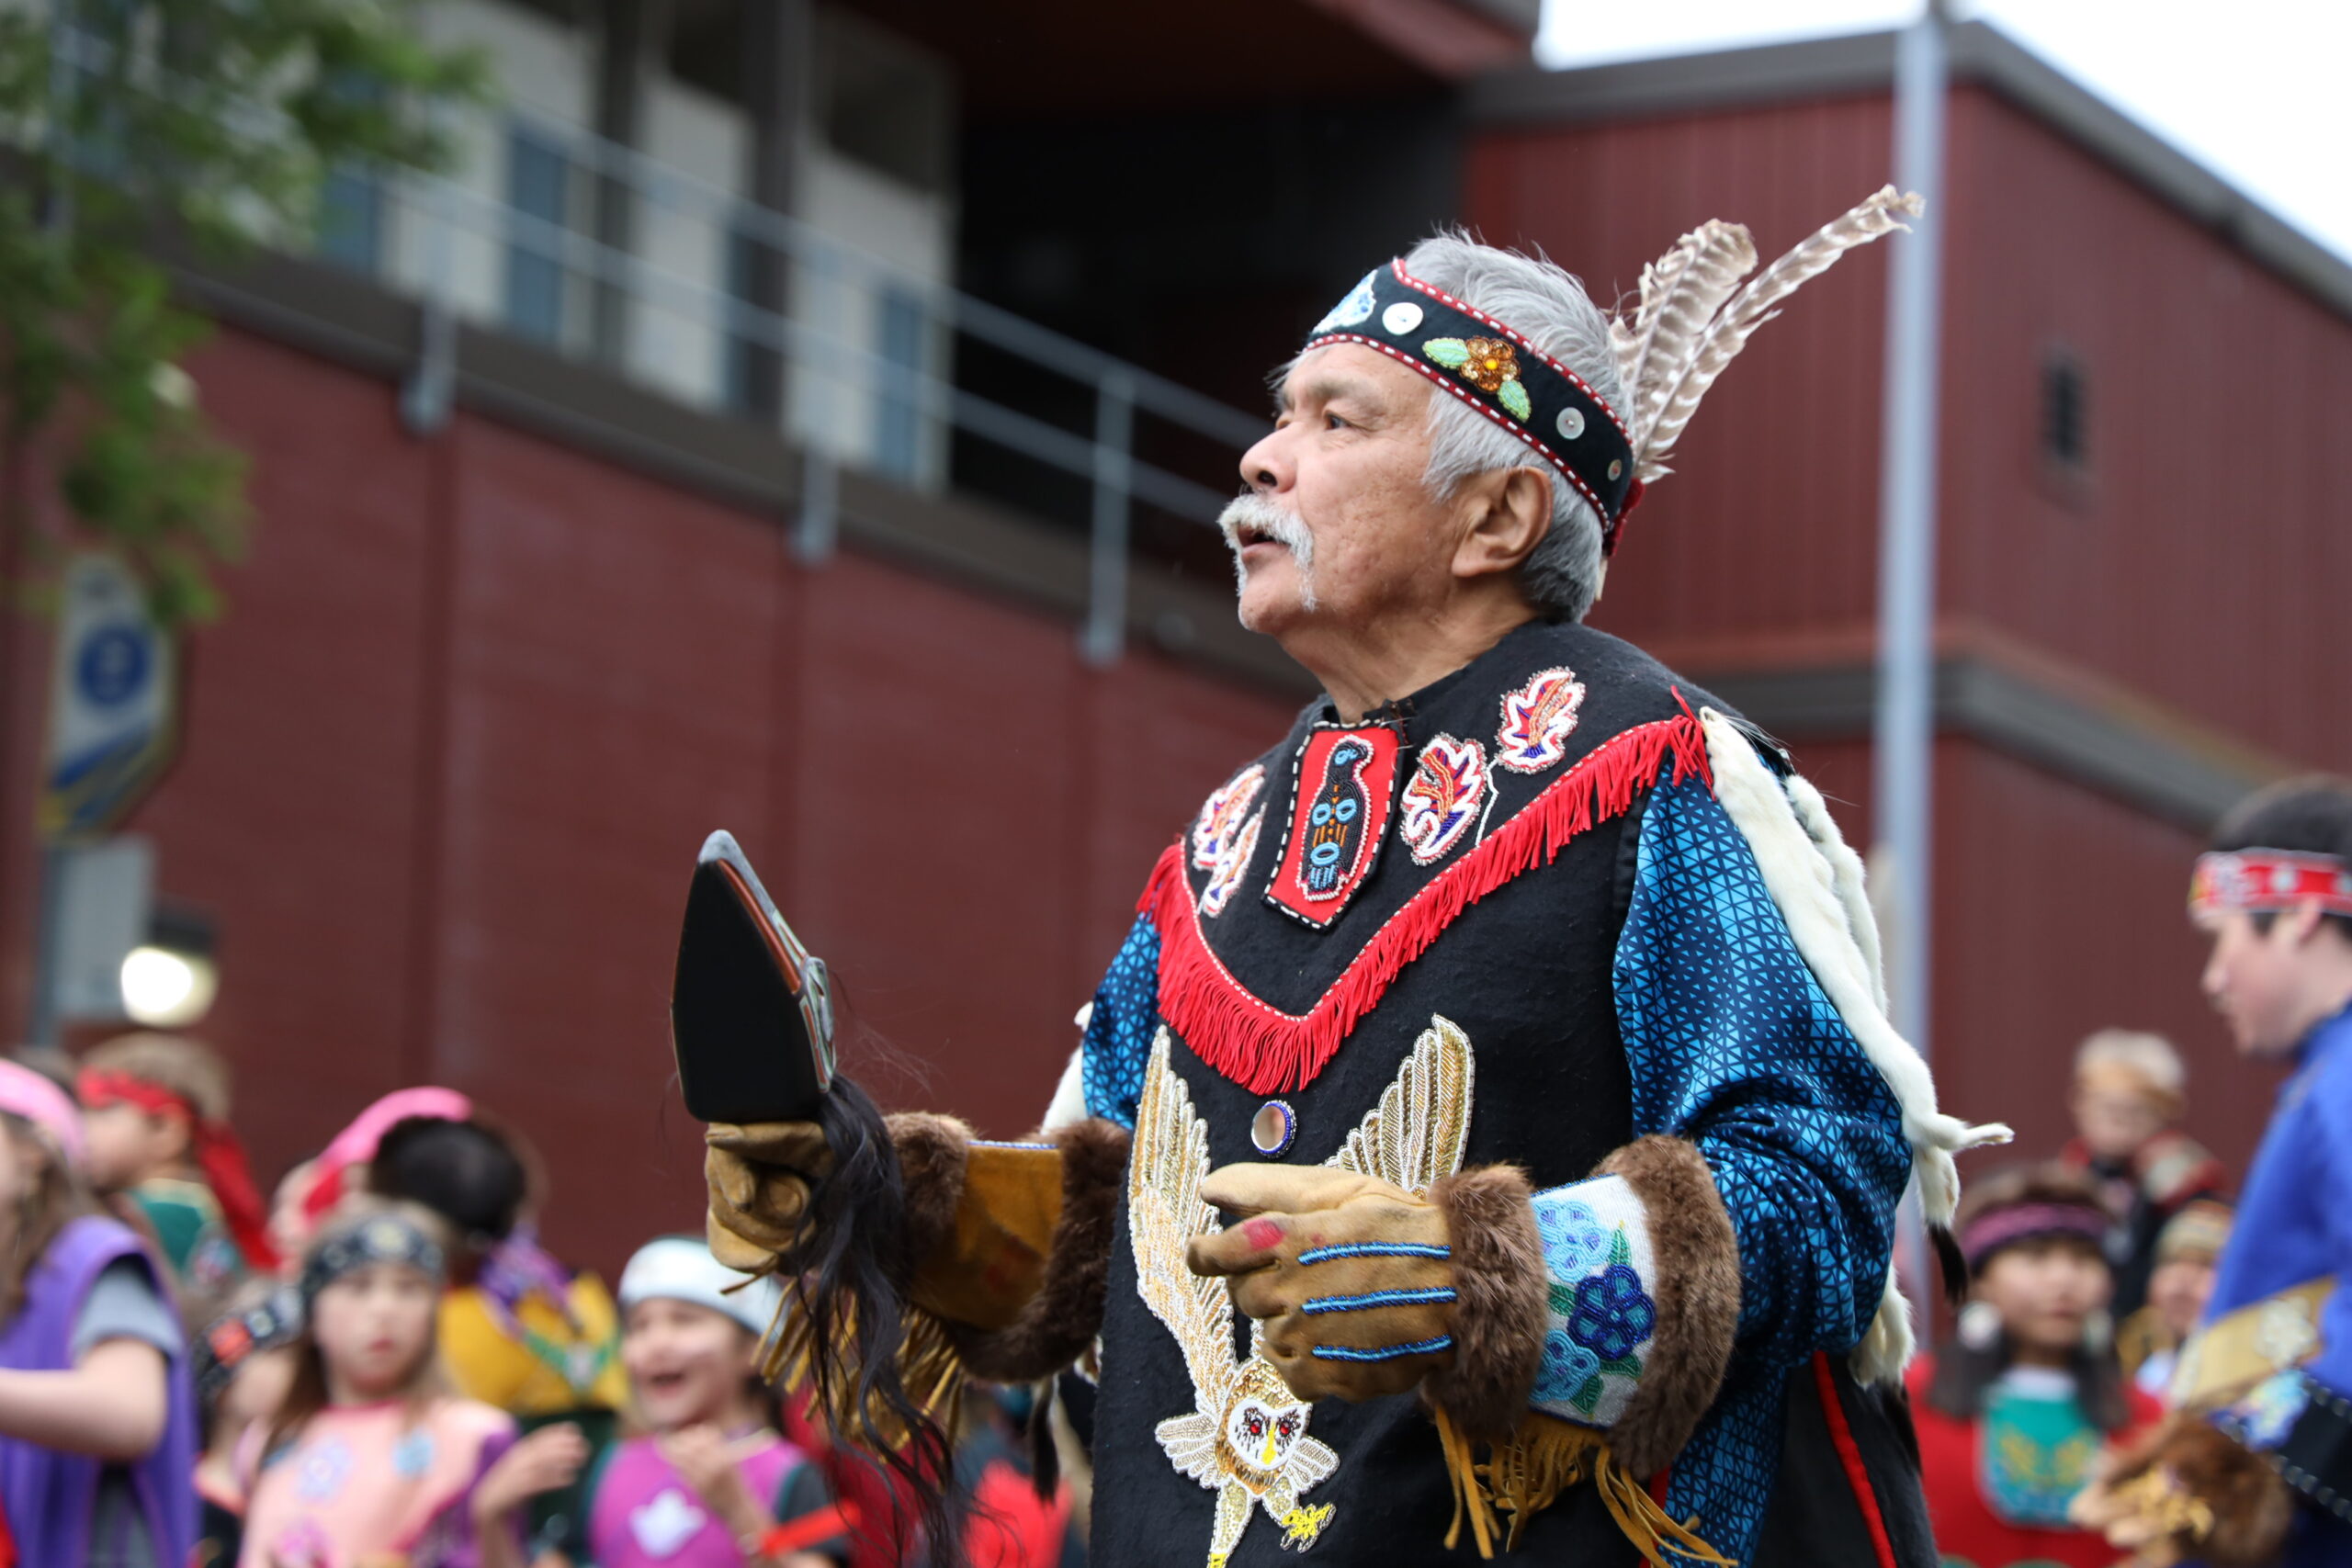 a man dances in the streets in traditional clothing for a celebration